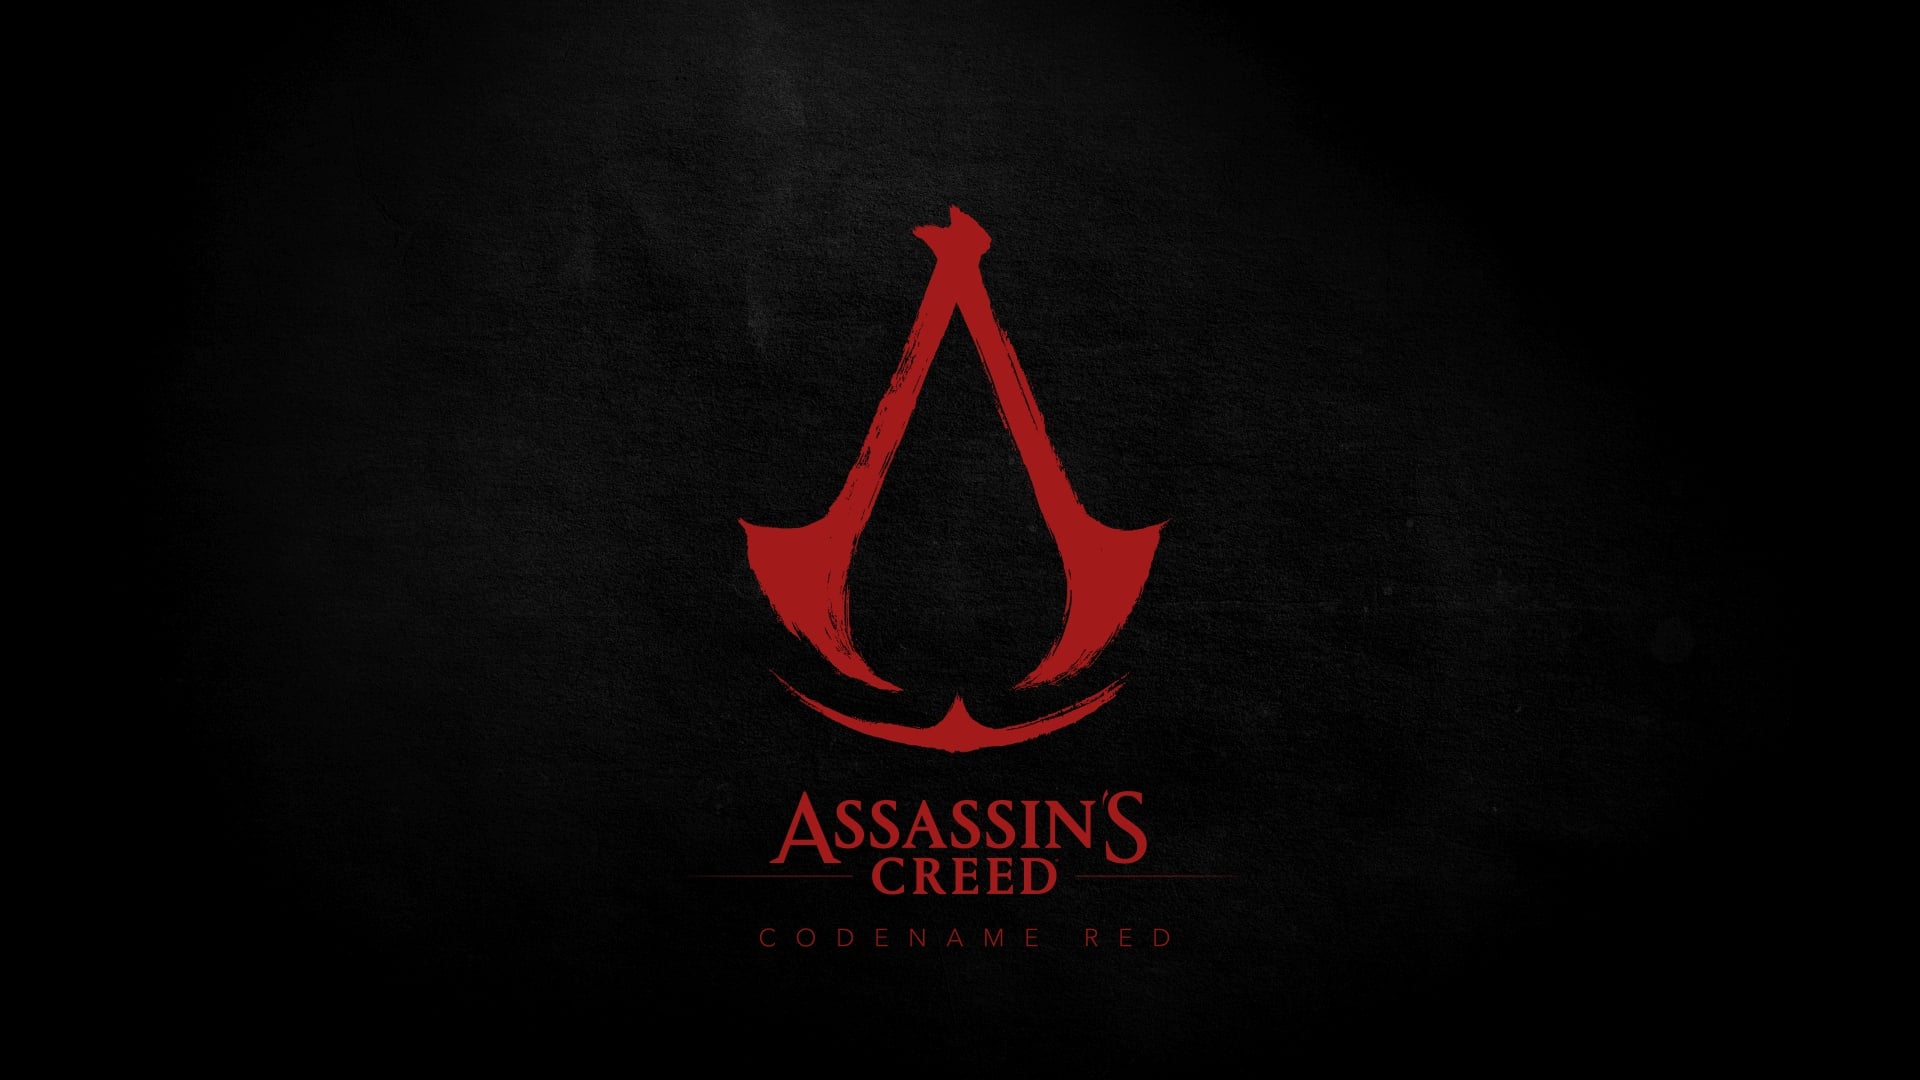 Assassin's Creed Codename Red takes players to Japan